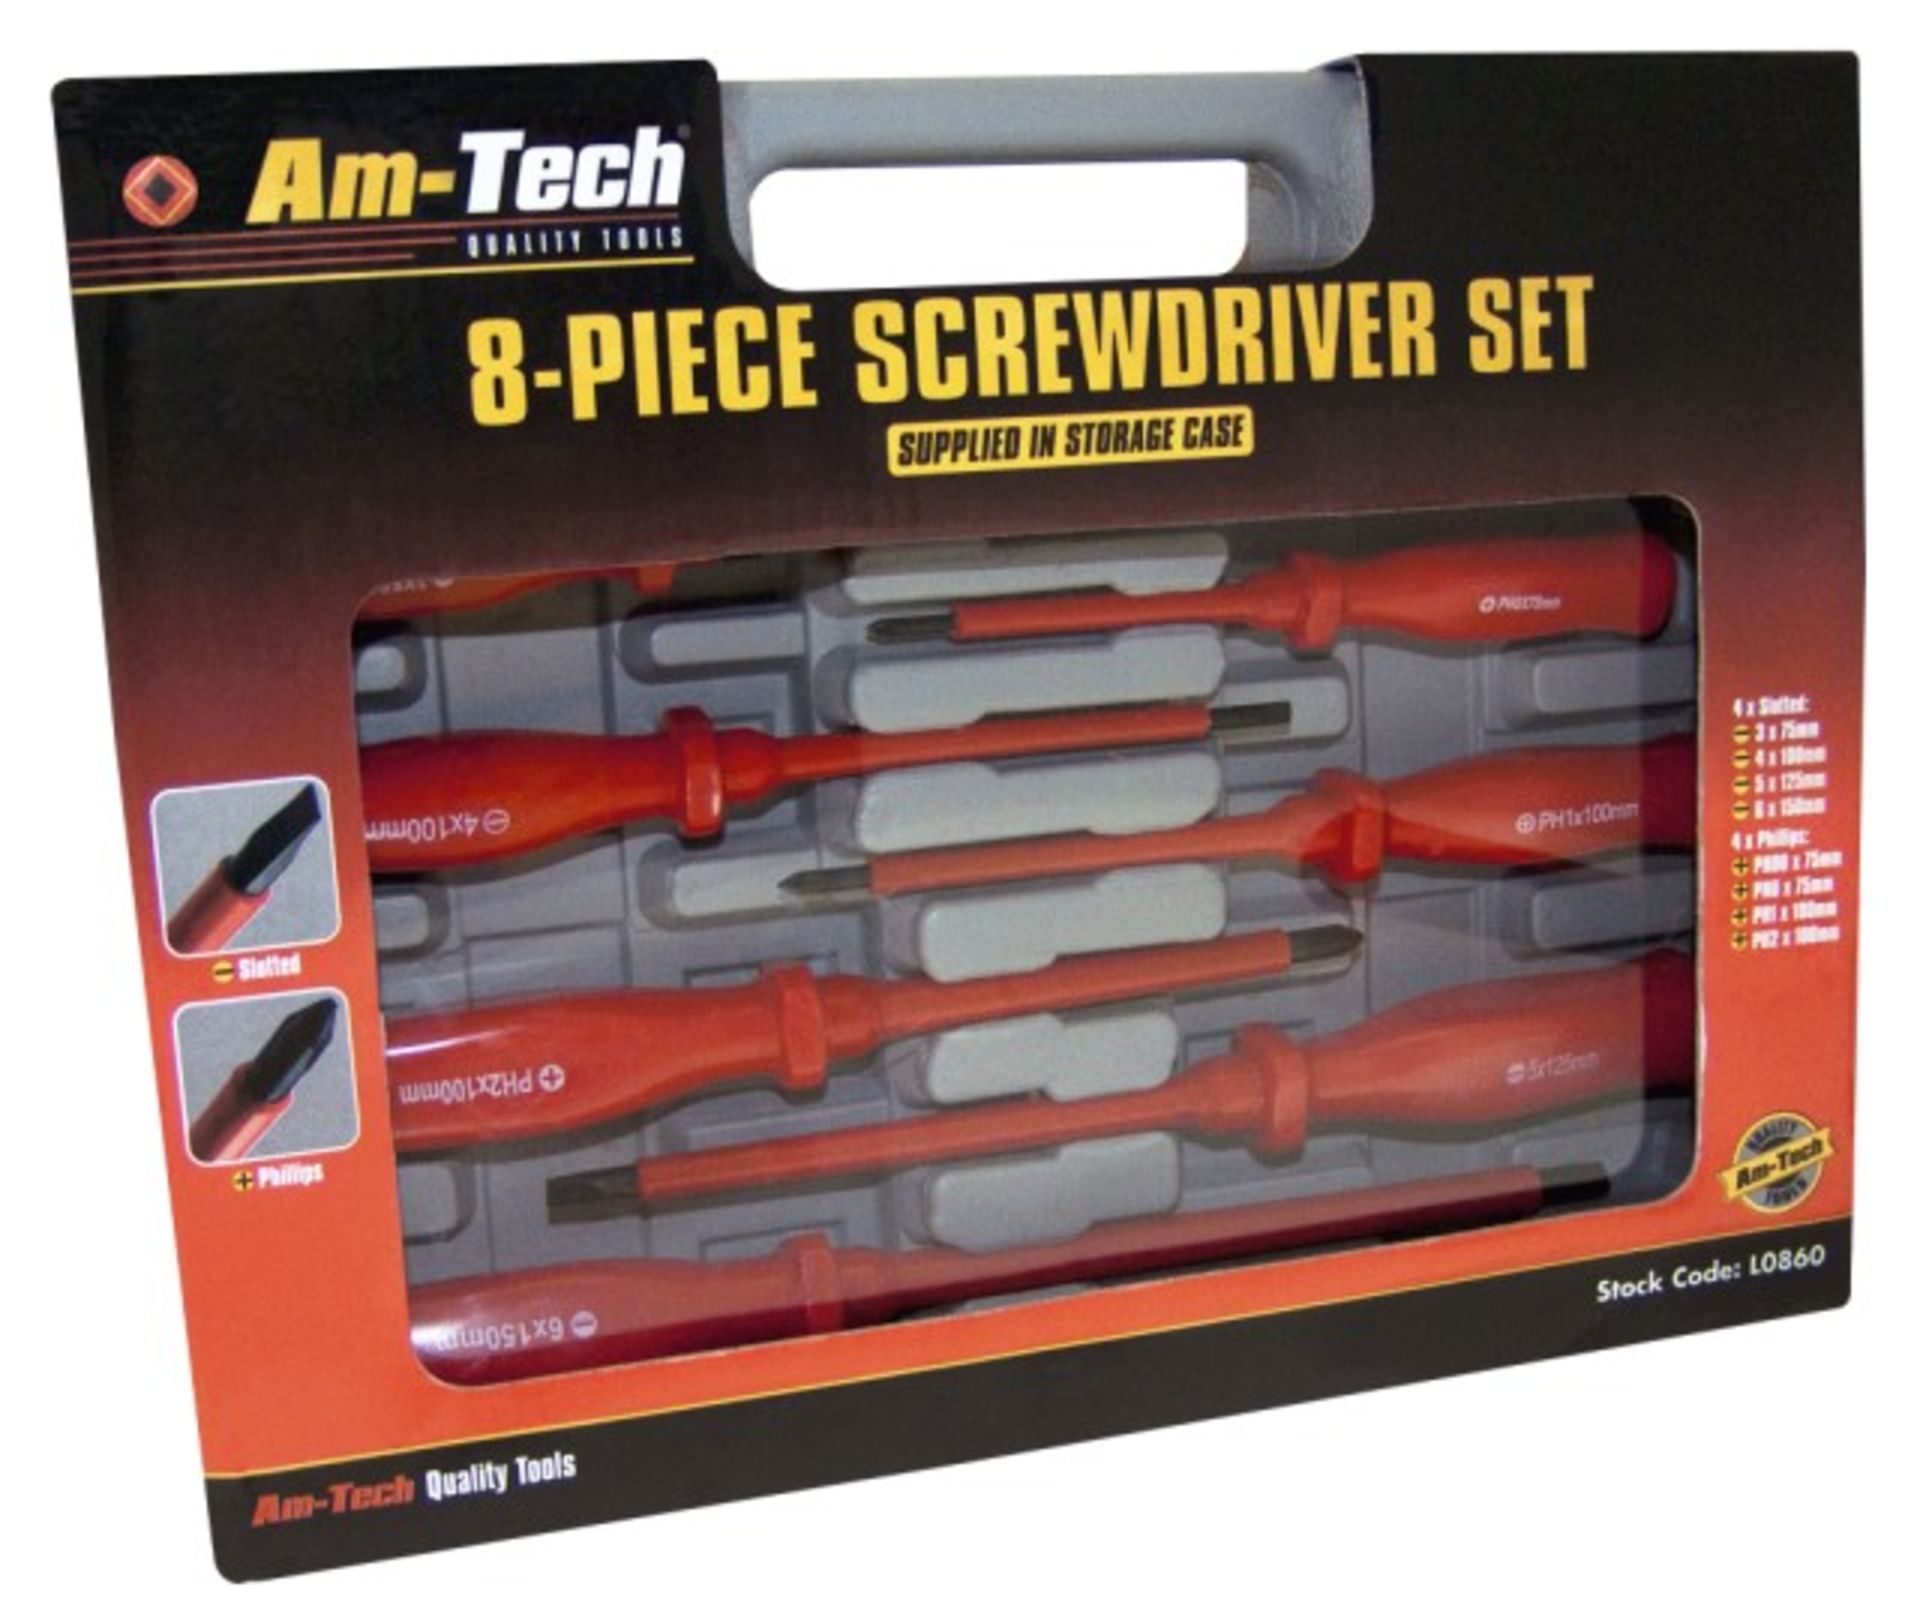 V *TRADE QTY* Brand New Eight Piece Screwdriver Set In Carry case X 4 YOUR BID PRICE TO BE